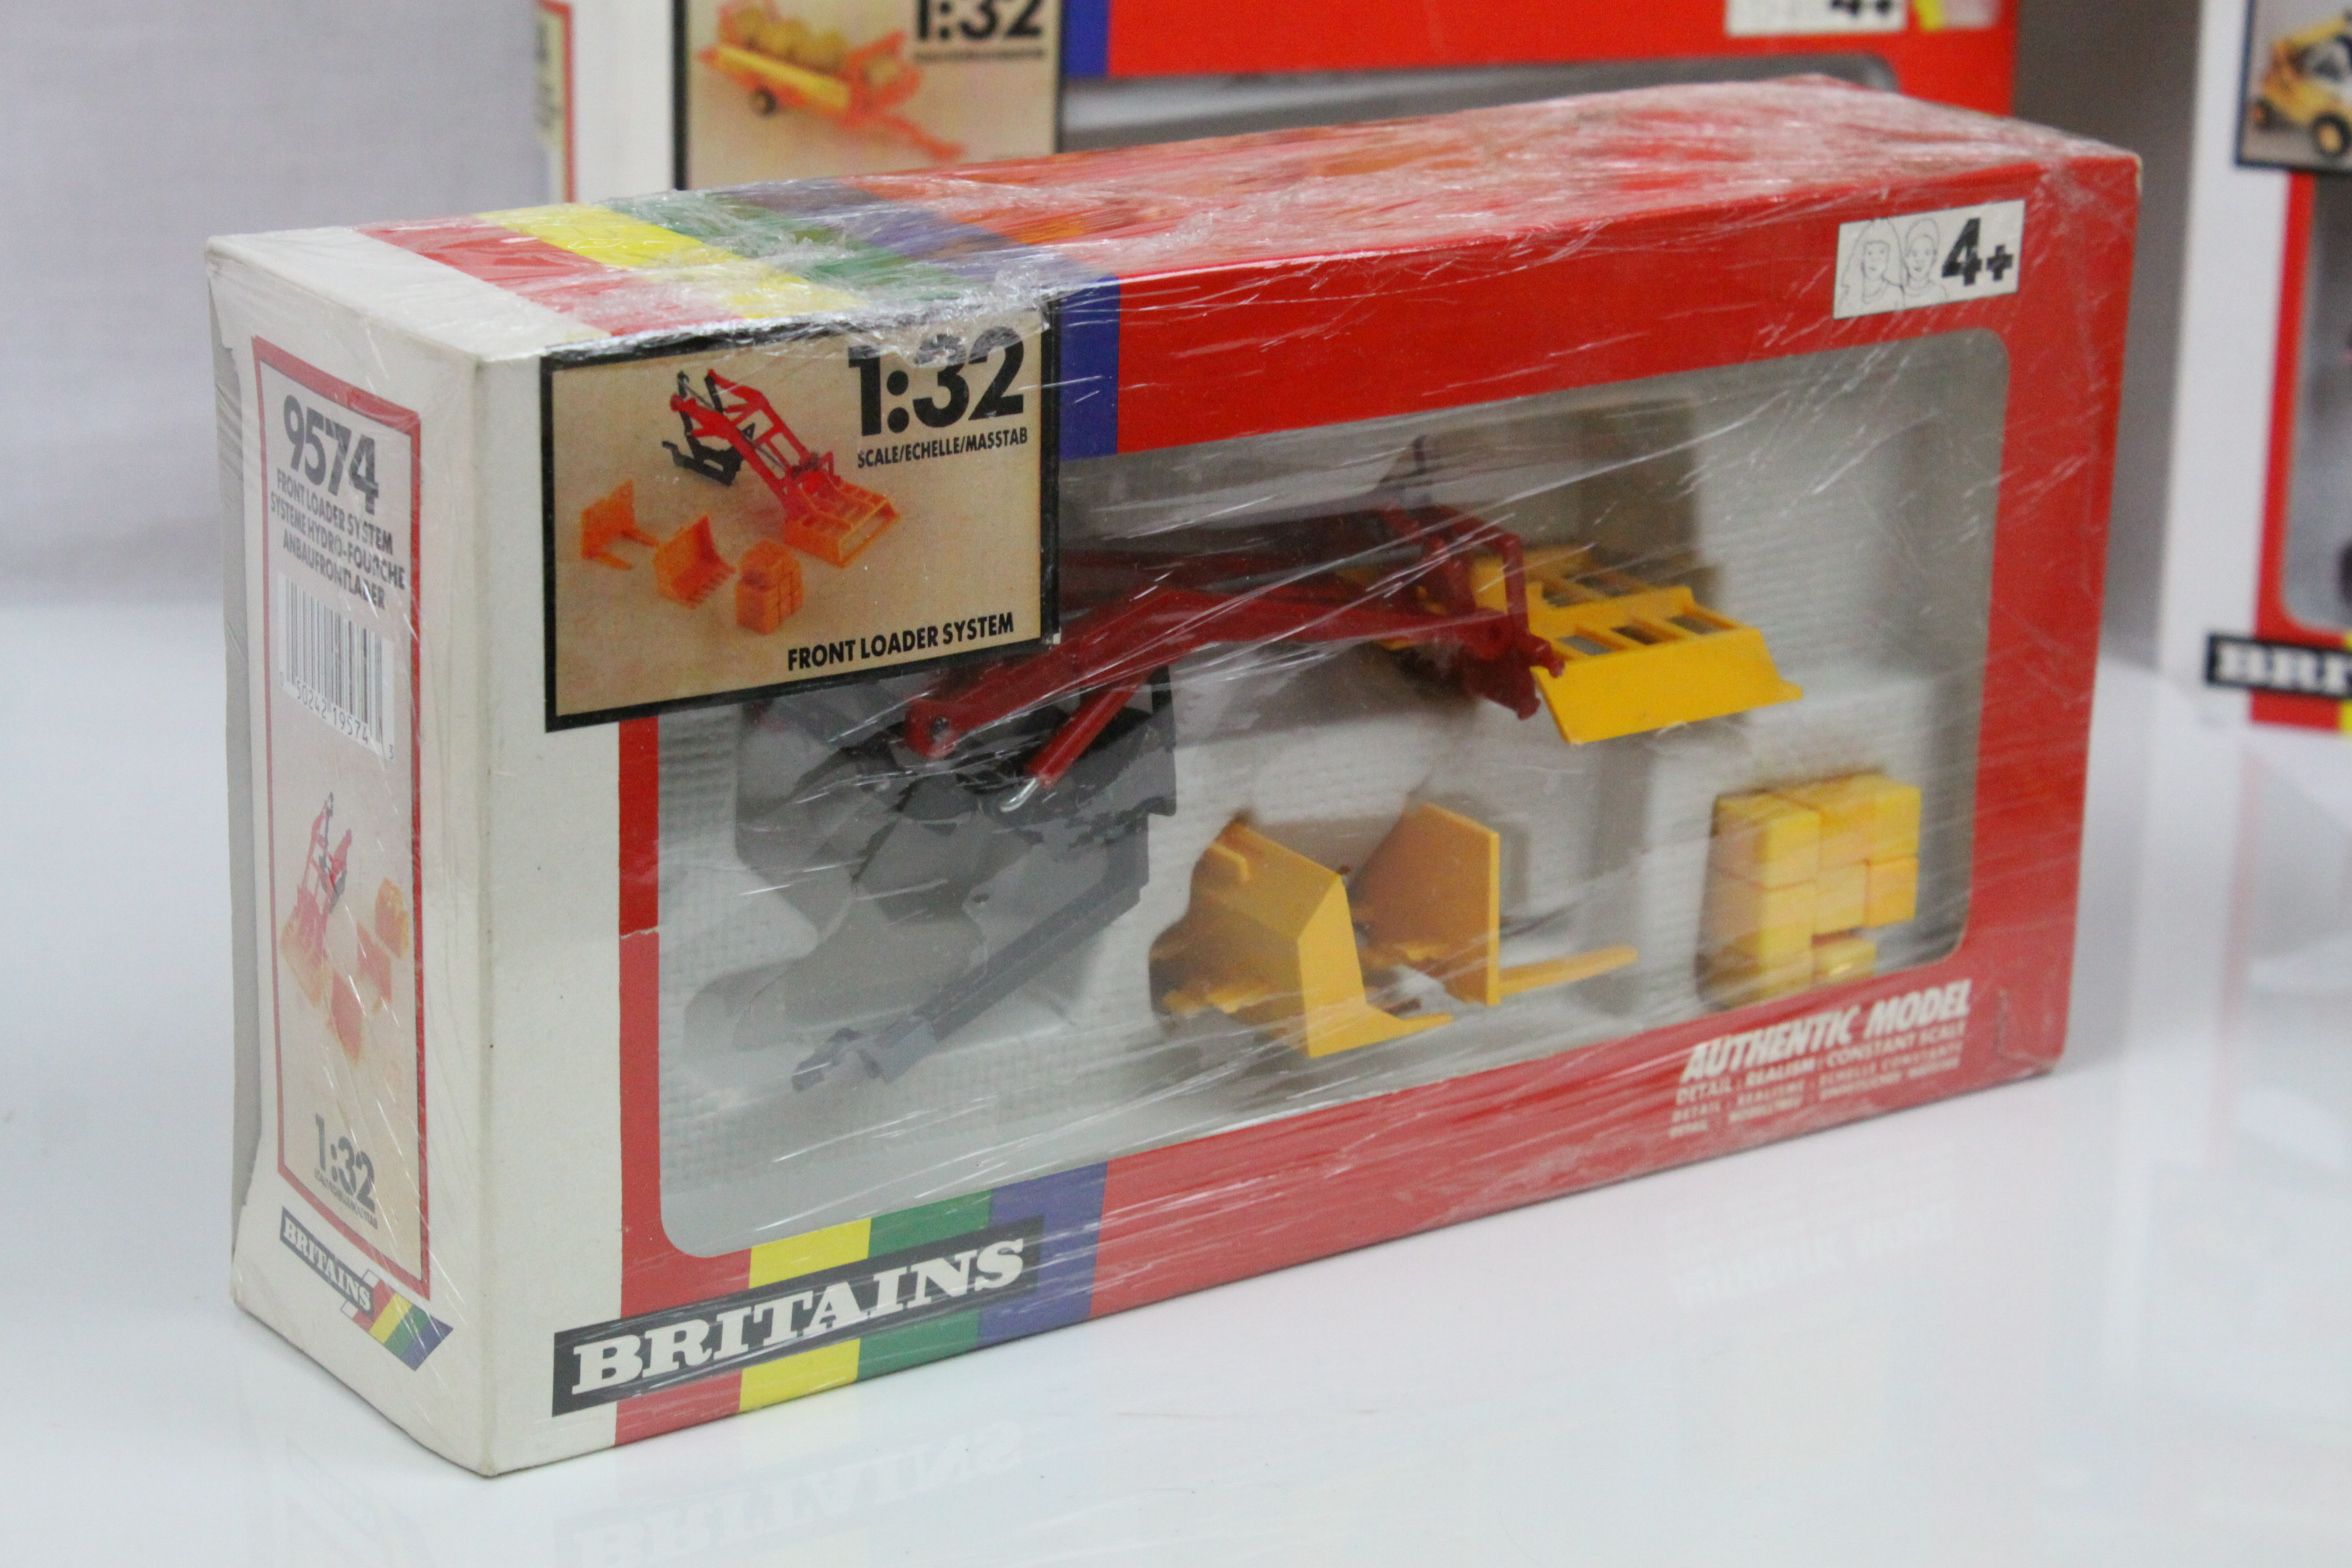 16 Boxed 1:32 Britains farming models to include 9566, 9559, 9539, 9548, 9547, 9574, 9509, 9519, - Image 17 of 27